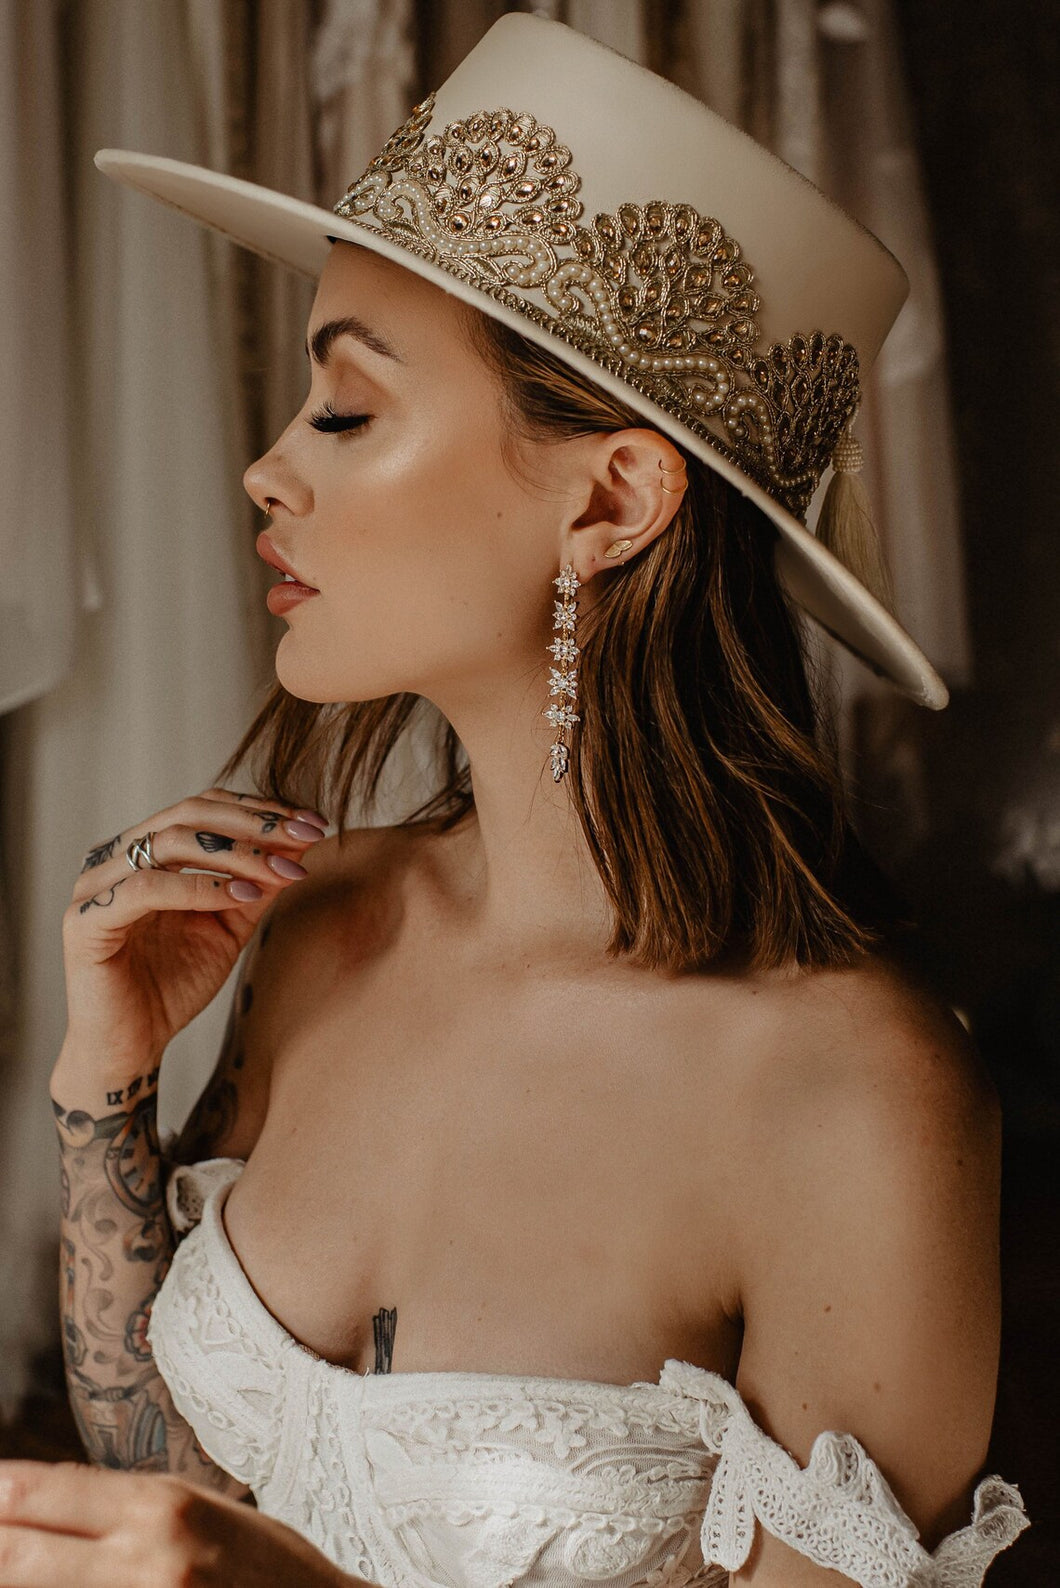 Bridal collection boater suede hat “I DO” in ivory/gold